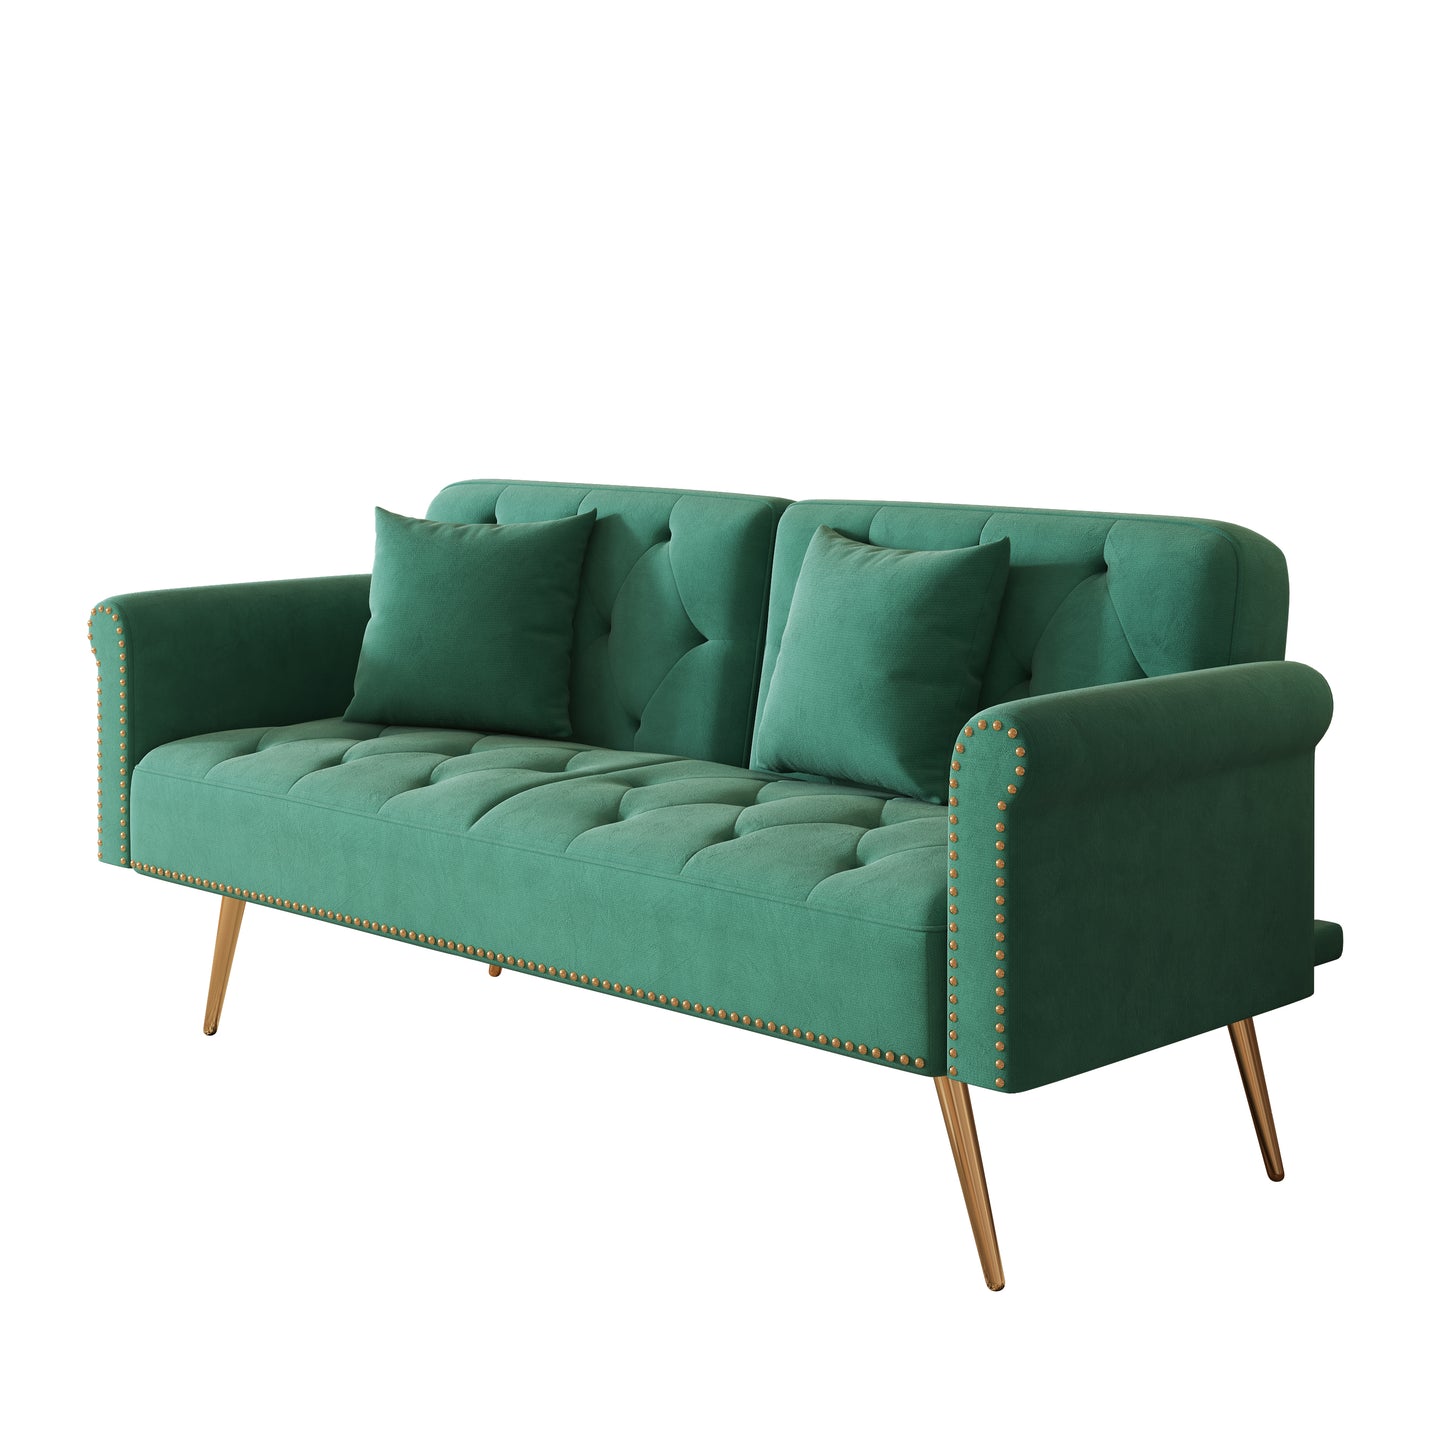 69.7 "green velvet nail head sofa bed with throw pillow